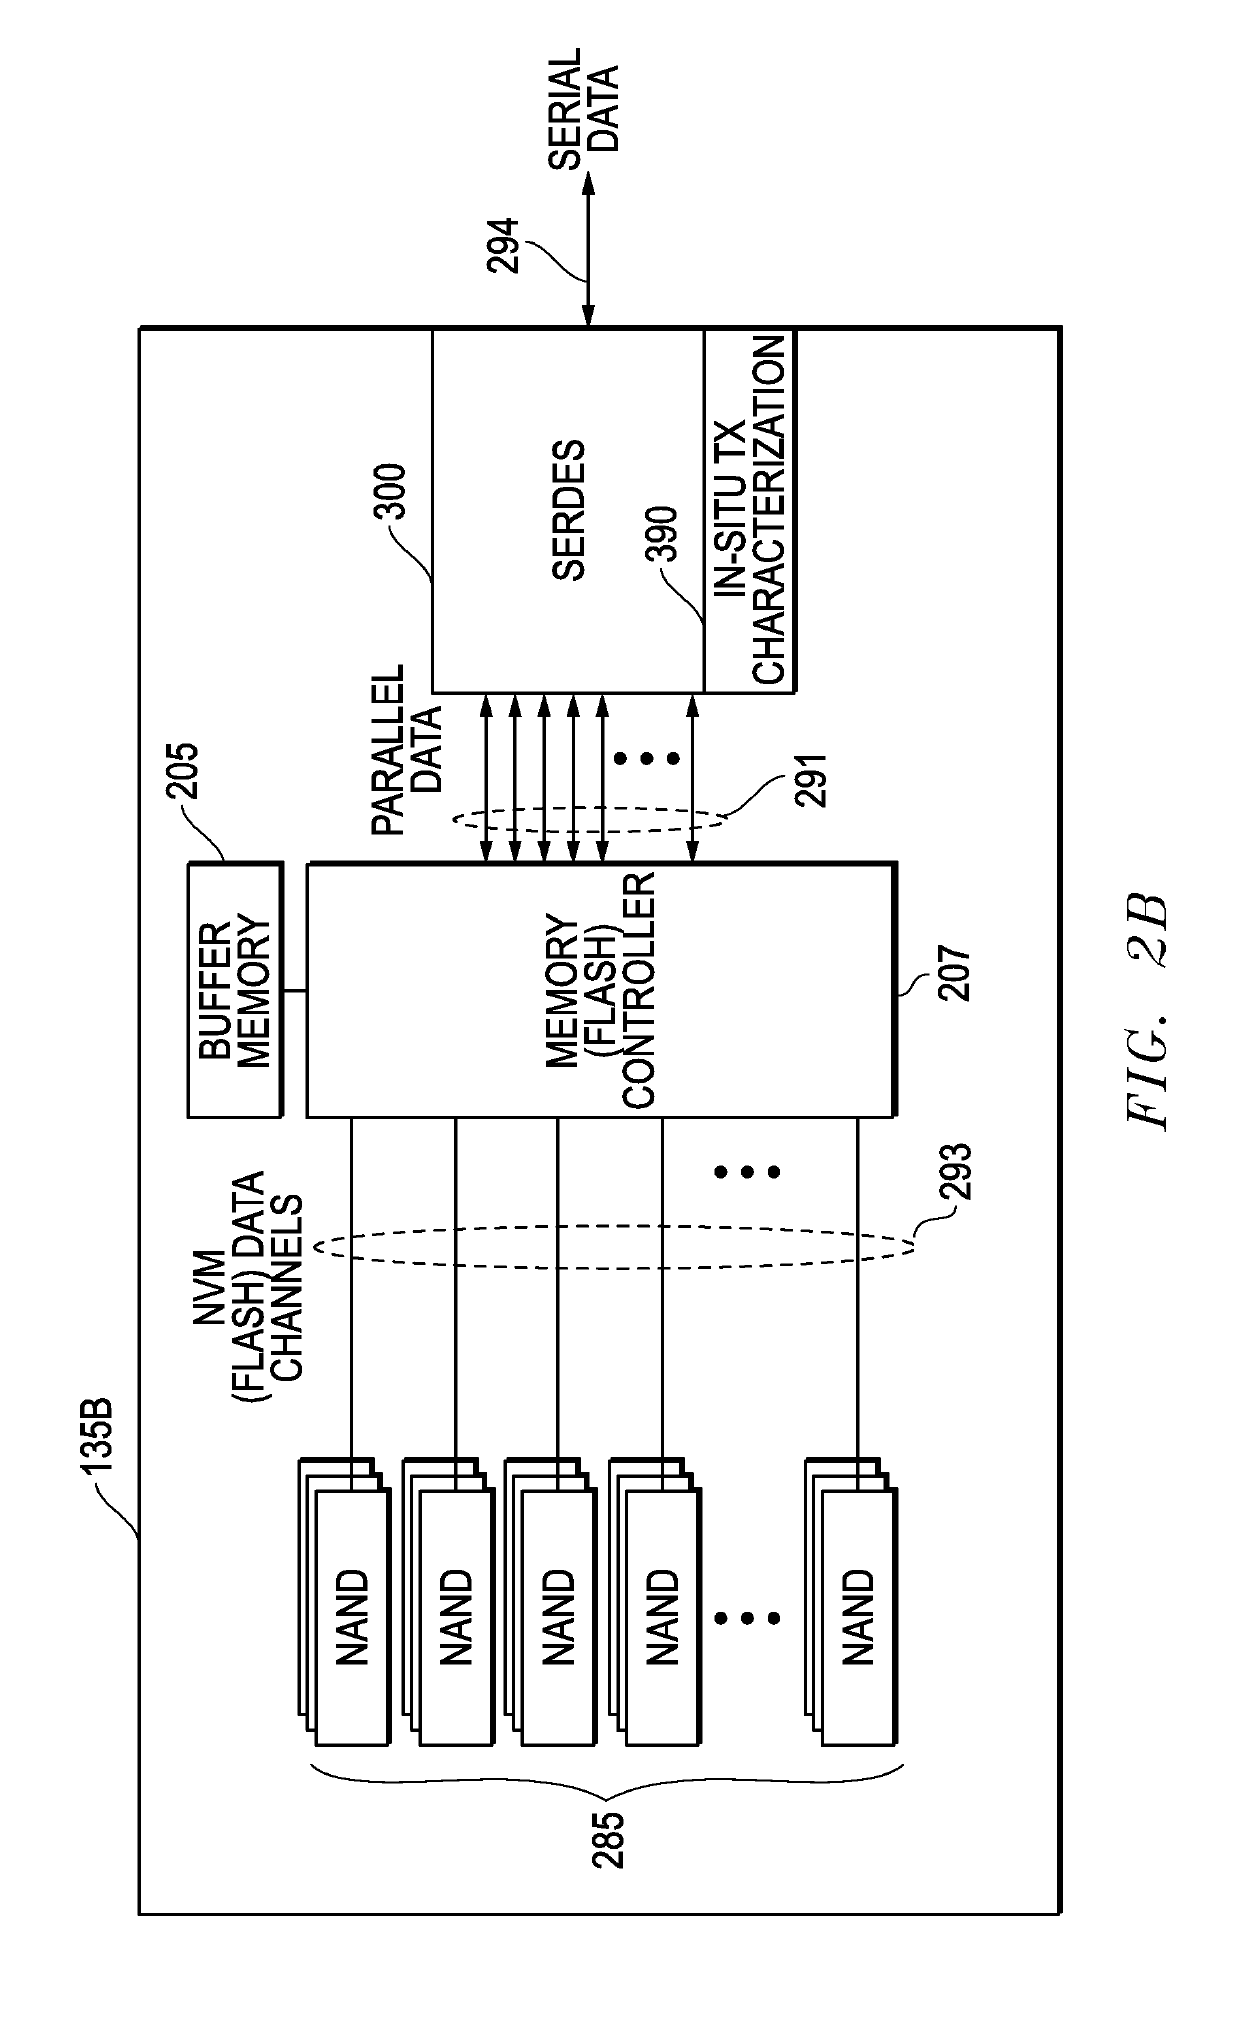 Systems and methods of in-situ digital eye characterization for serial data transmitter circuitry